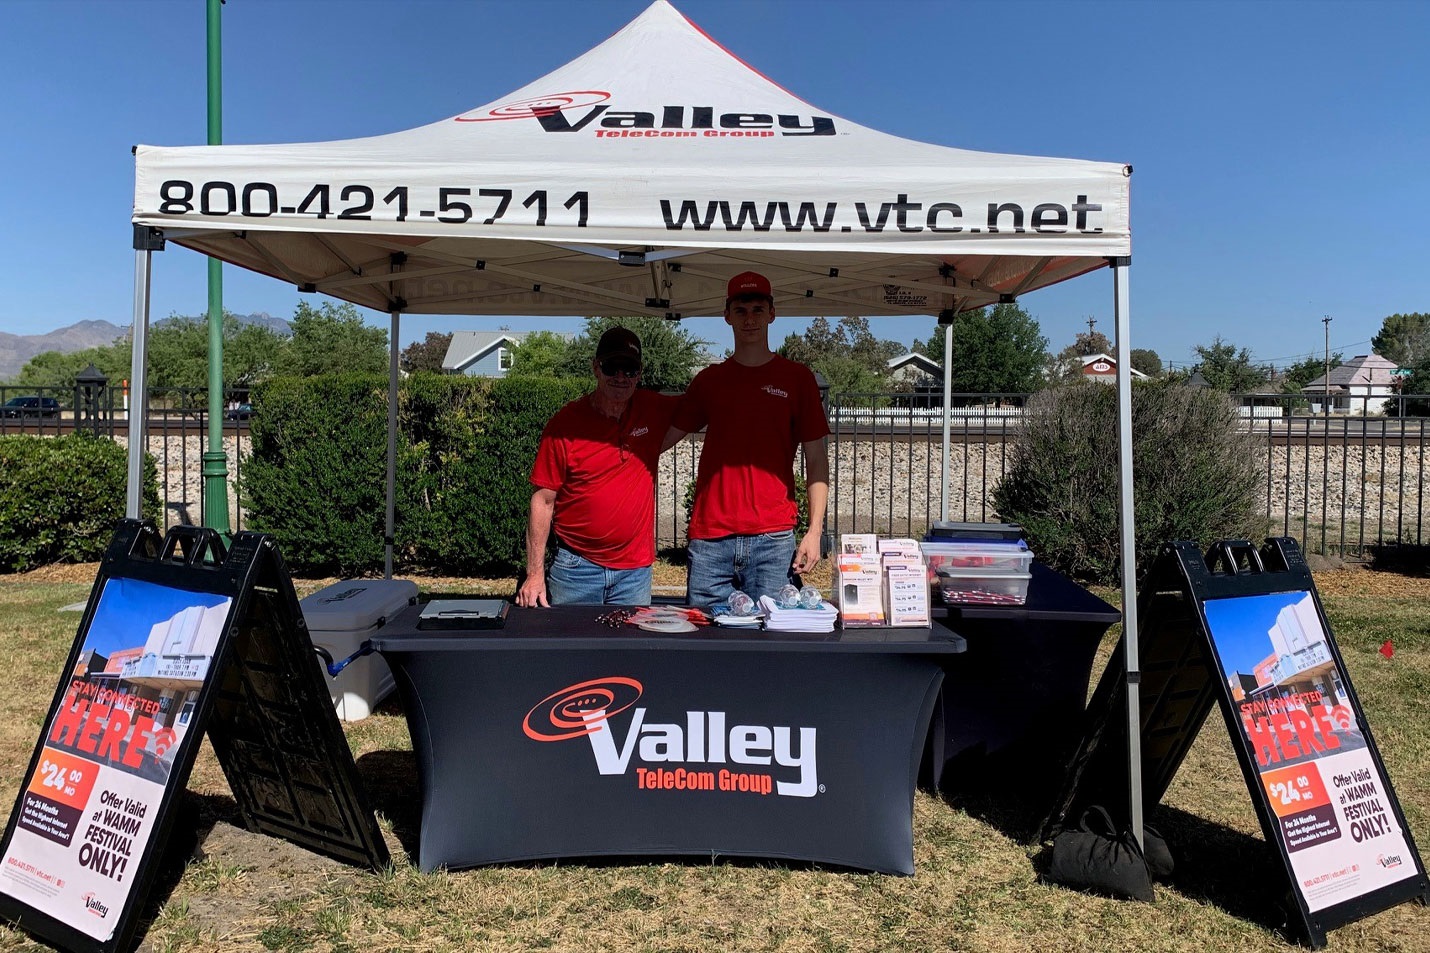 Valley at the Willcox Art Music and Movies Fest